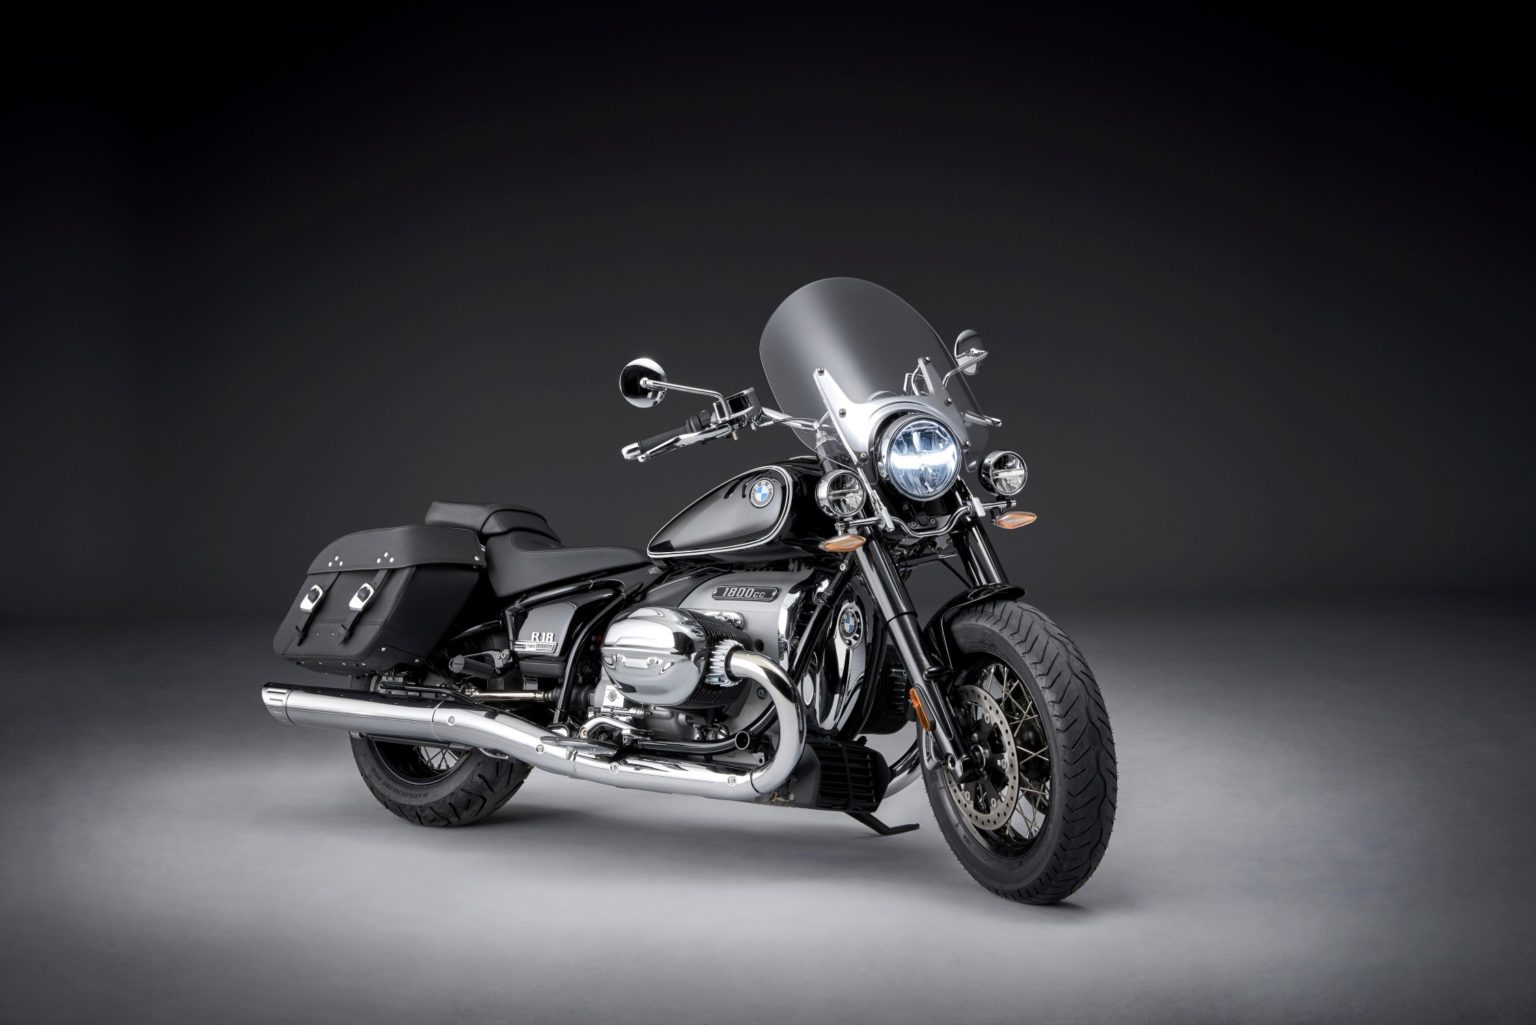 BMW R18 Classic Tourer Launched In India, Price Starts At INR 24 Lakh